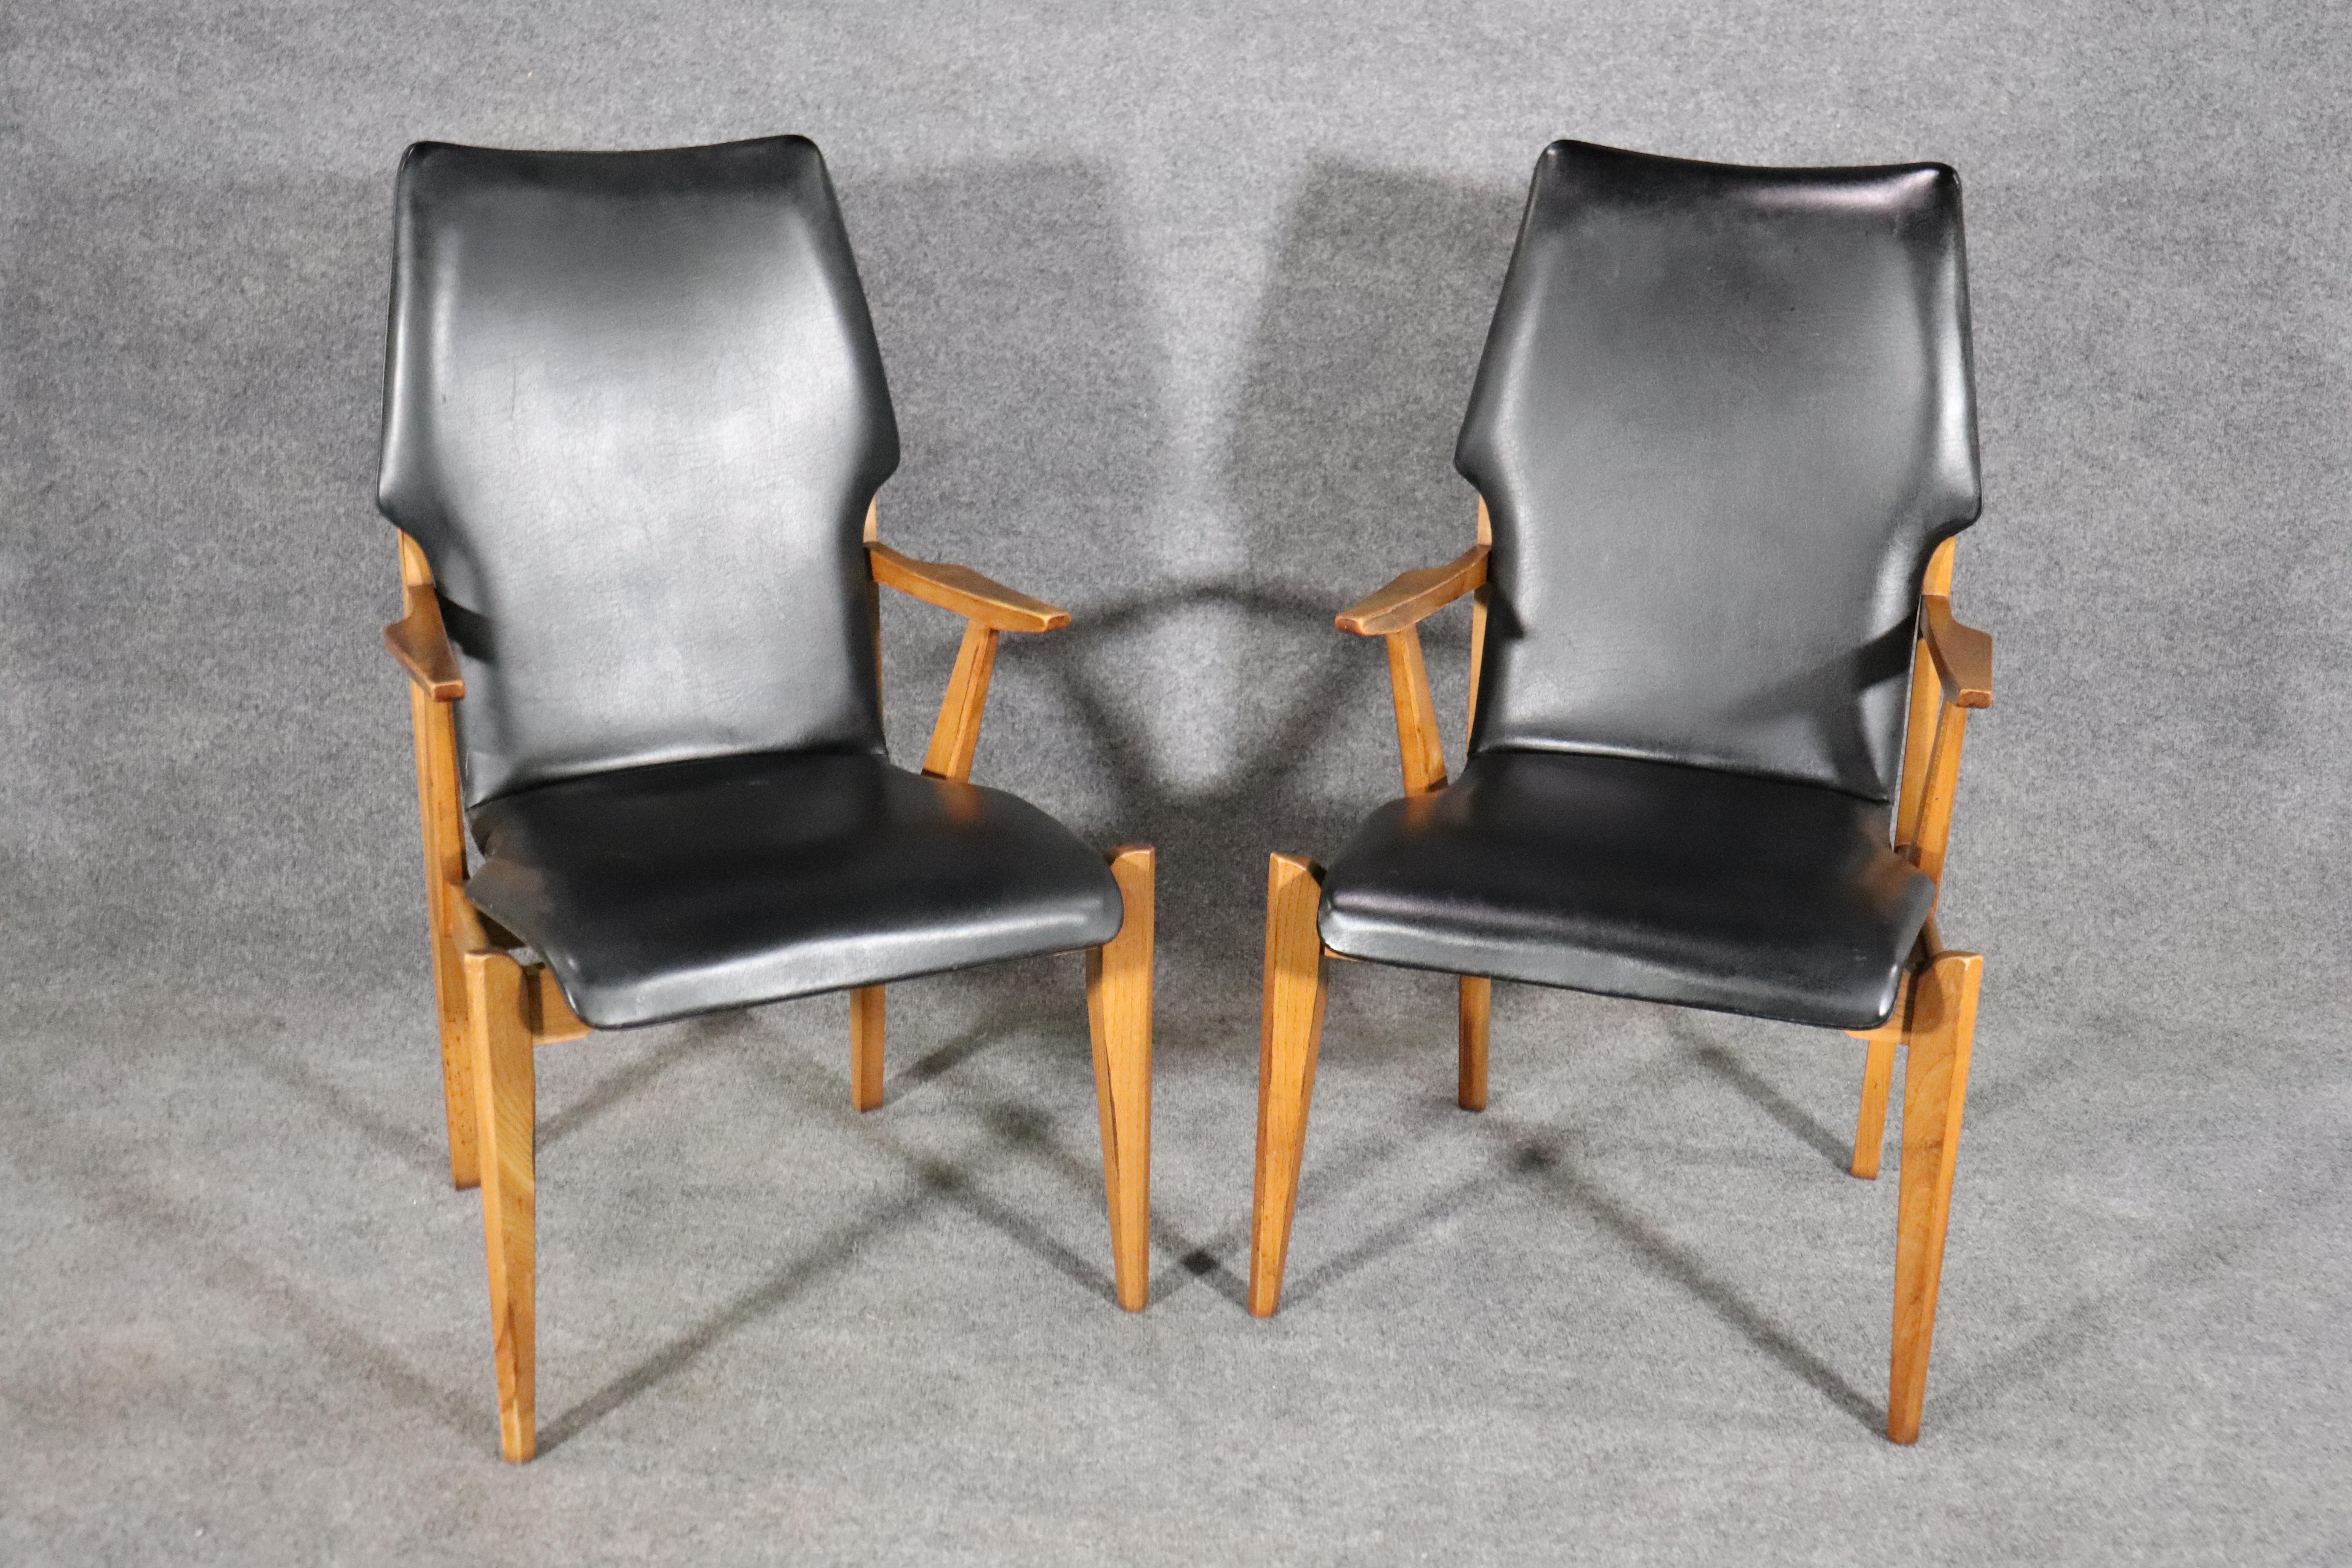 Set of eight dining chairs by Lane Furniture with bentwood seat and back set in a strong walnut frame. Black Naugahyde fabric, two armchairs.
Please confirm location.